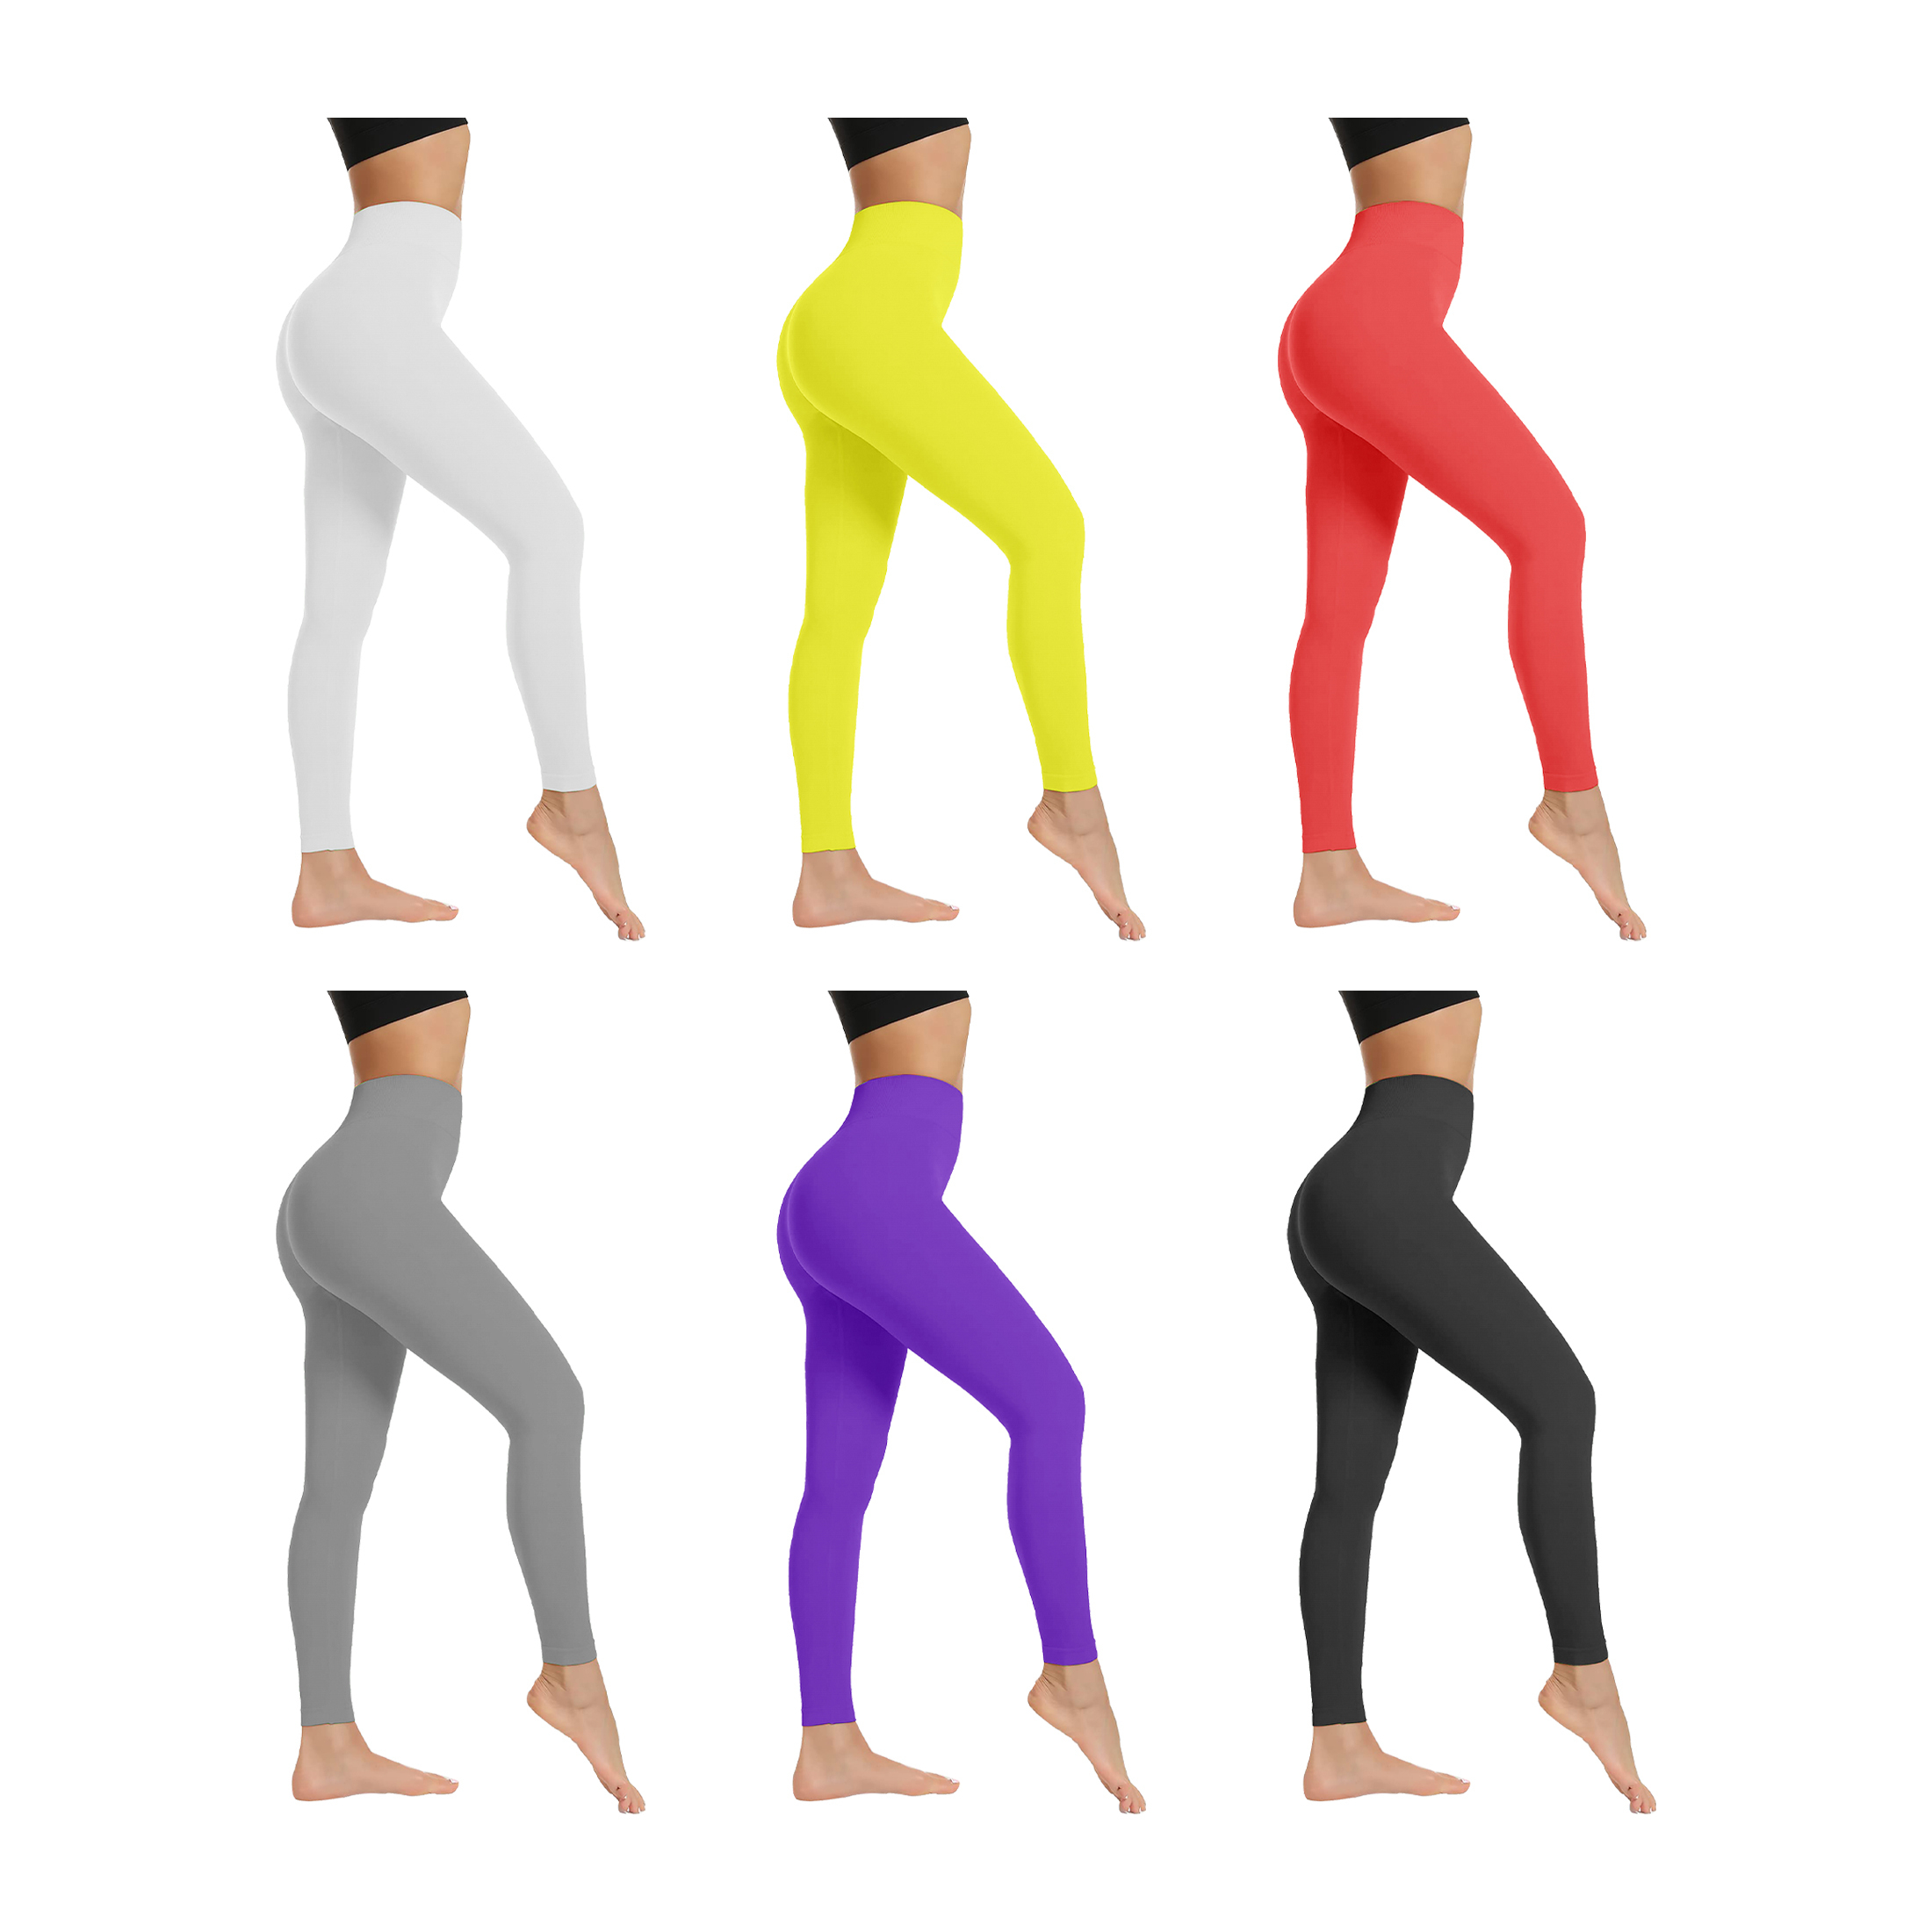 1-Pack: Women's High-Waist Ultra-Soft Stretchy Solid Fitness Yoga Leggings Pants - S